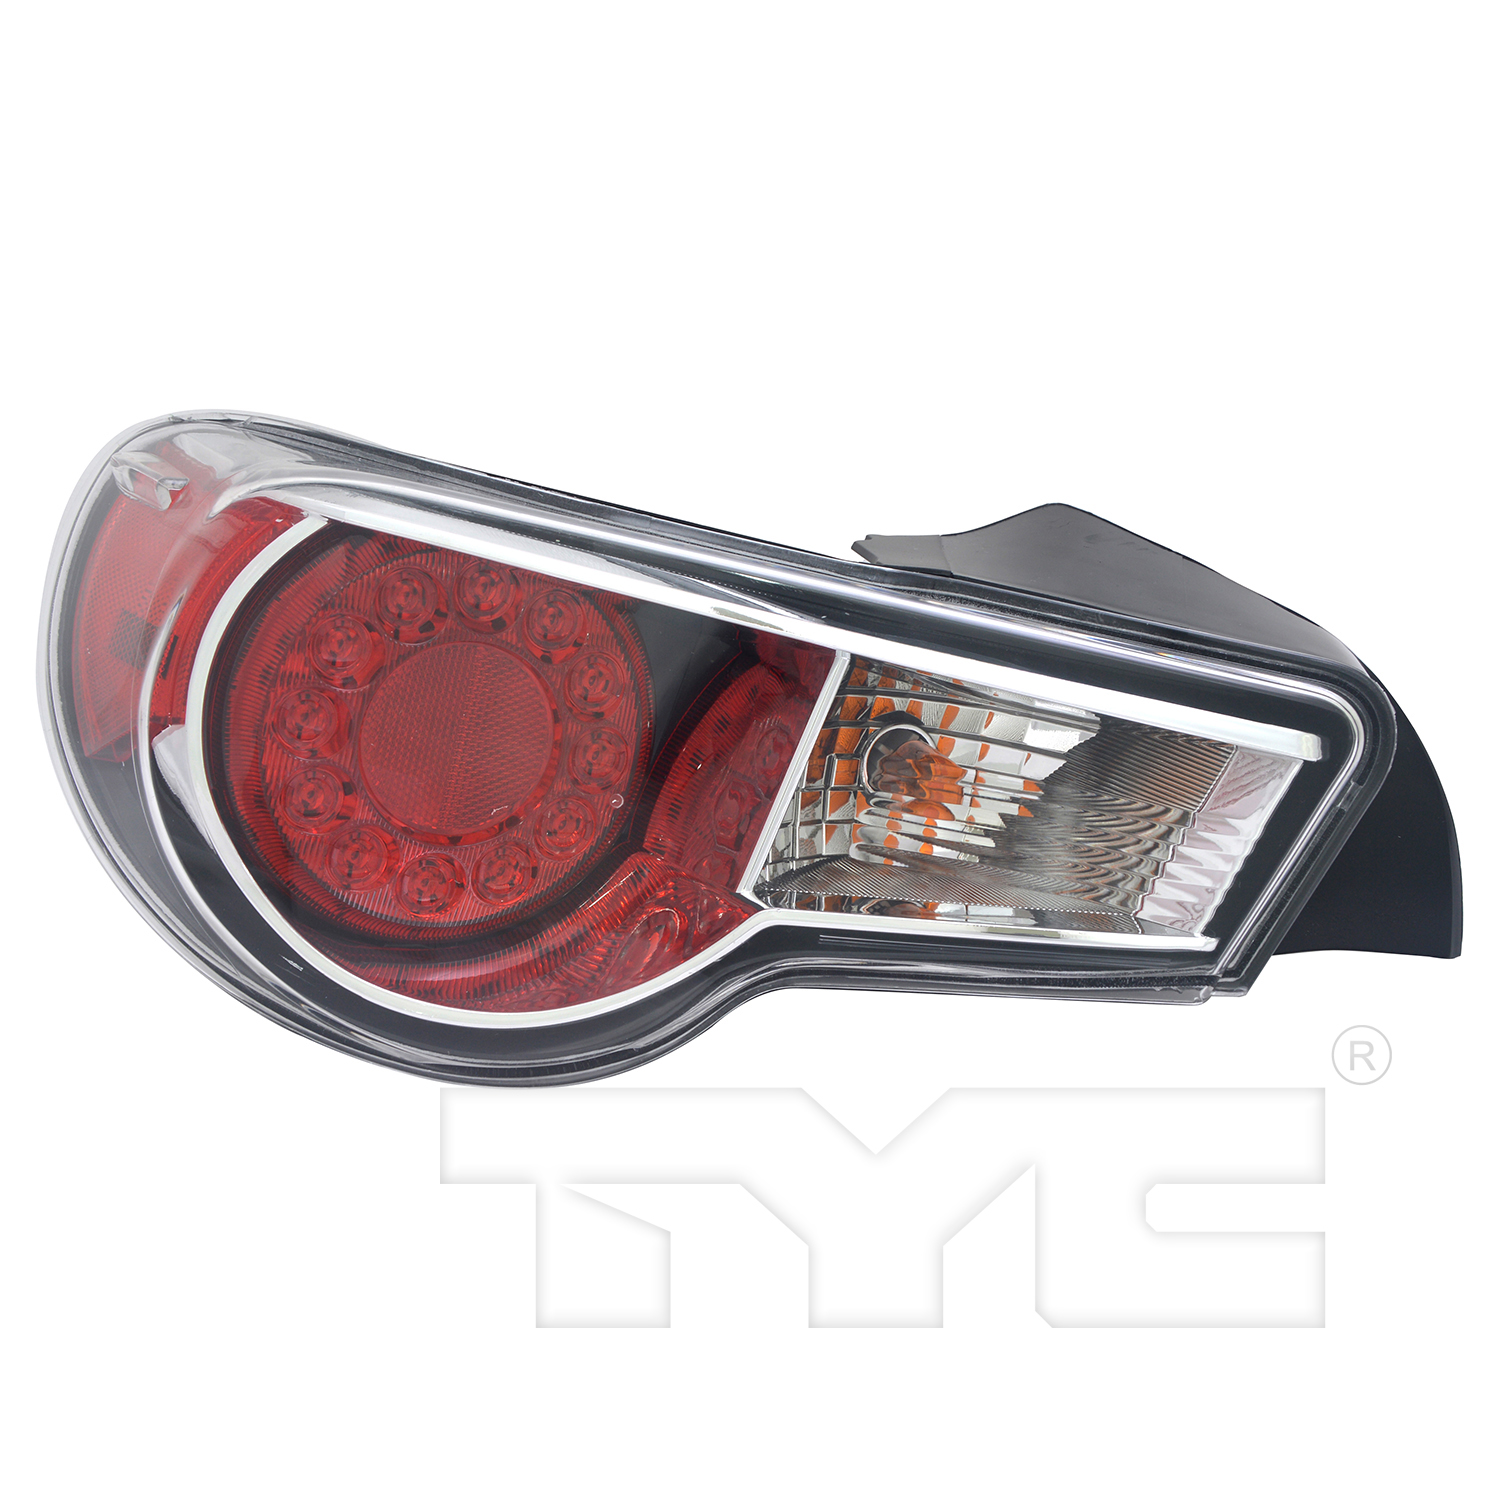 Aftermarket TAILLIGHTS for SCION - FR-S, FR-S,13-16,LT Taillamp lens/housing